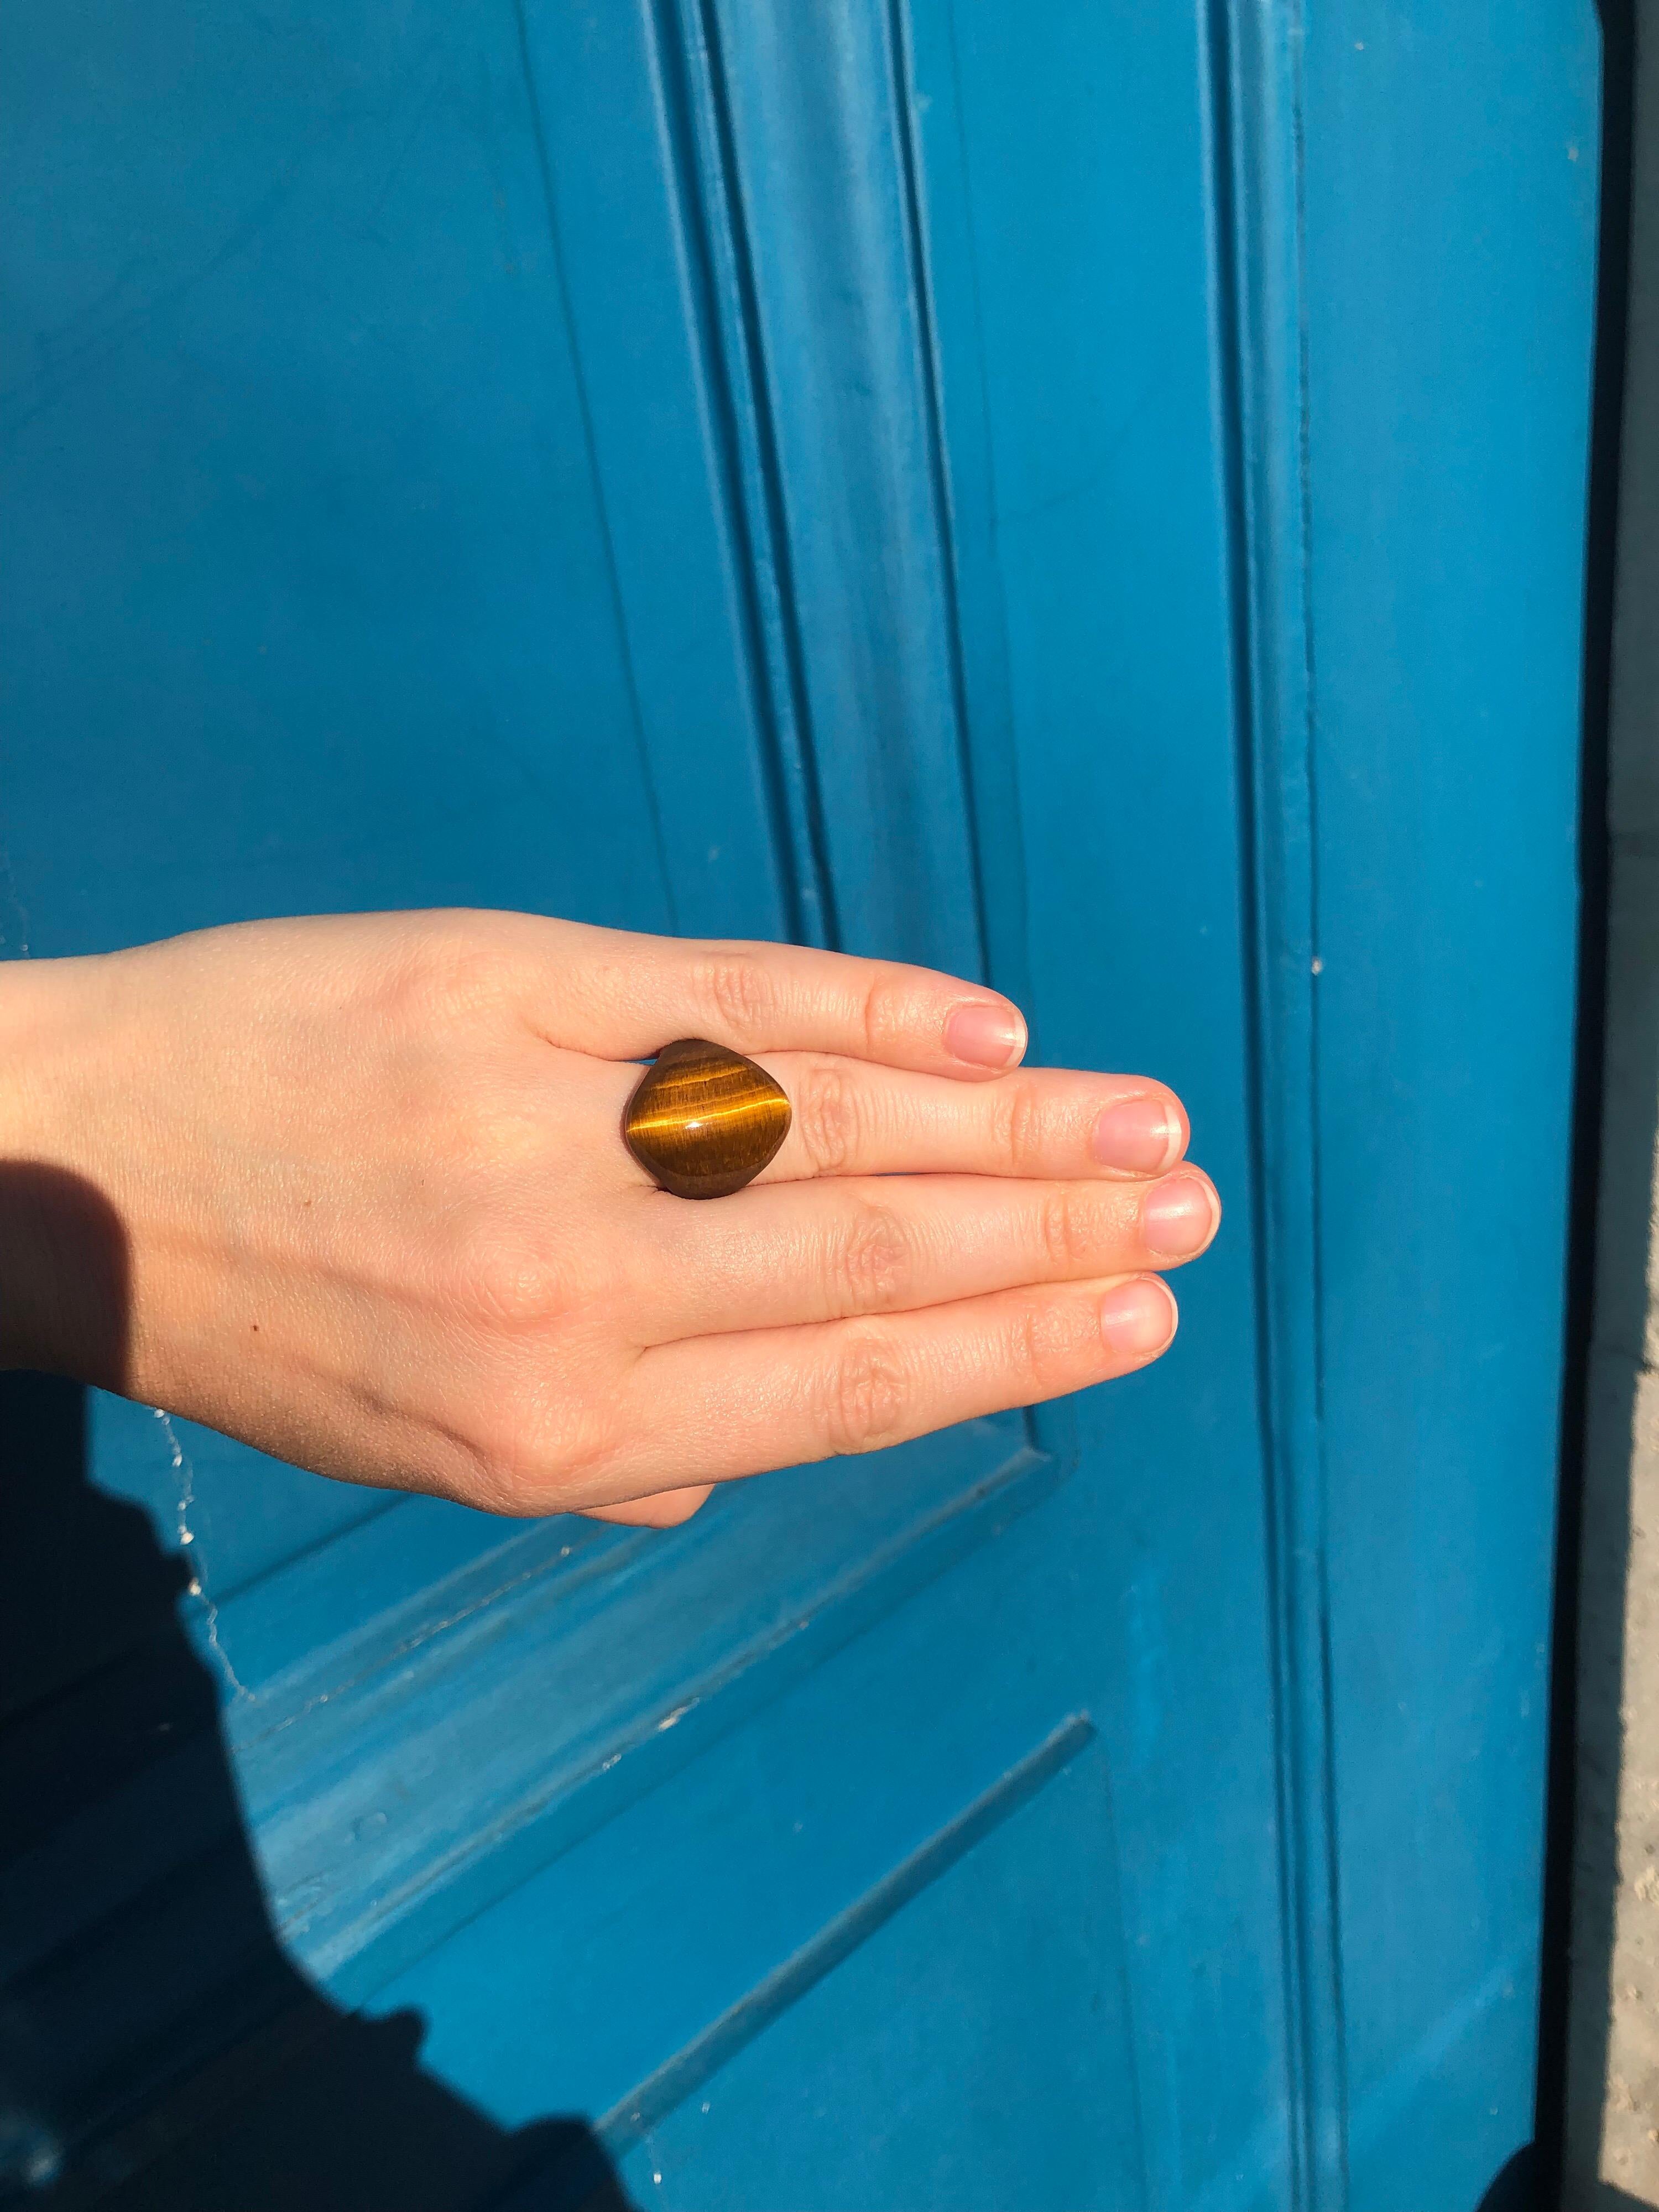 This modern ring is made of a large tiger's eye on the top half part and of gold 22 karat on the bottom part. The gold ring allows more confort and bring more colour to the ring.
The tiger's eye line is at the center of the stone and shows a light